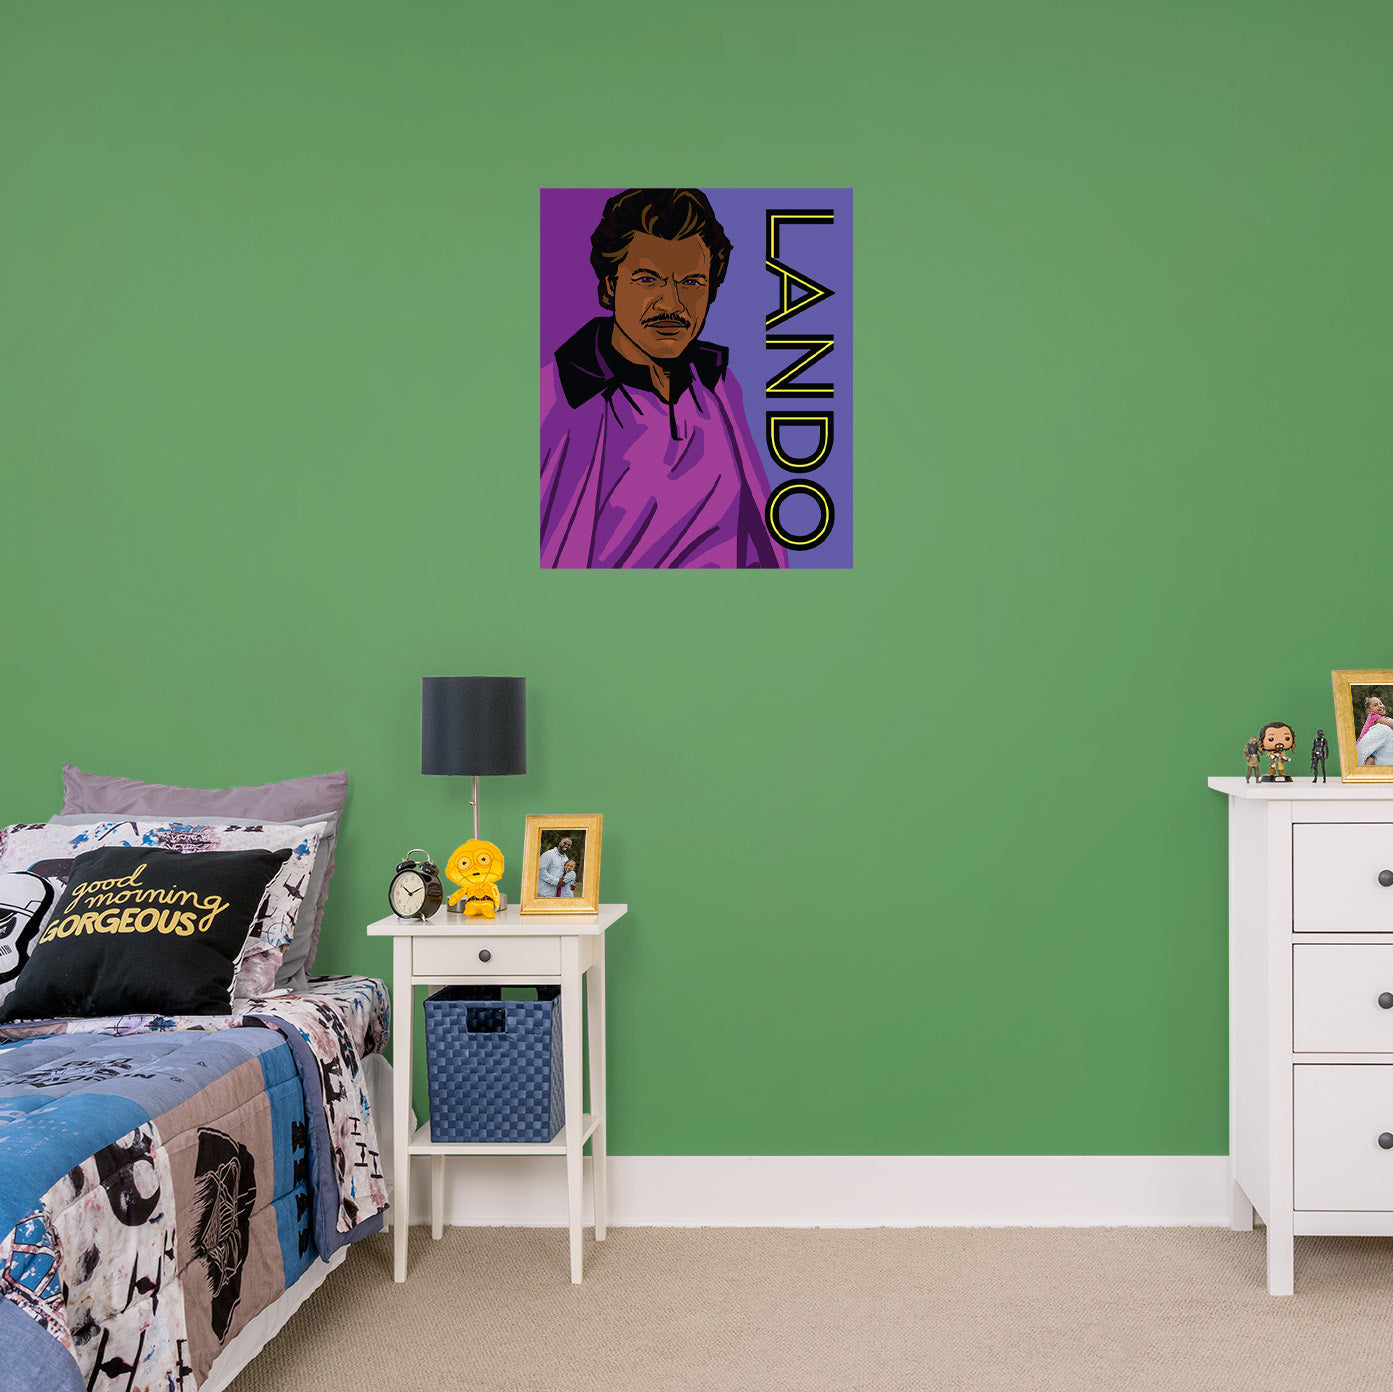 Lando Calrissian LANDO Pop Art Poster - Officially Licensed Star Wars Removable Adhesive Decal